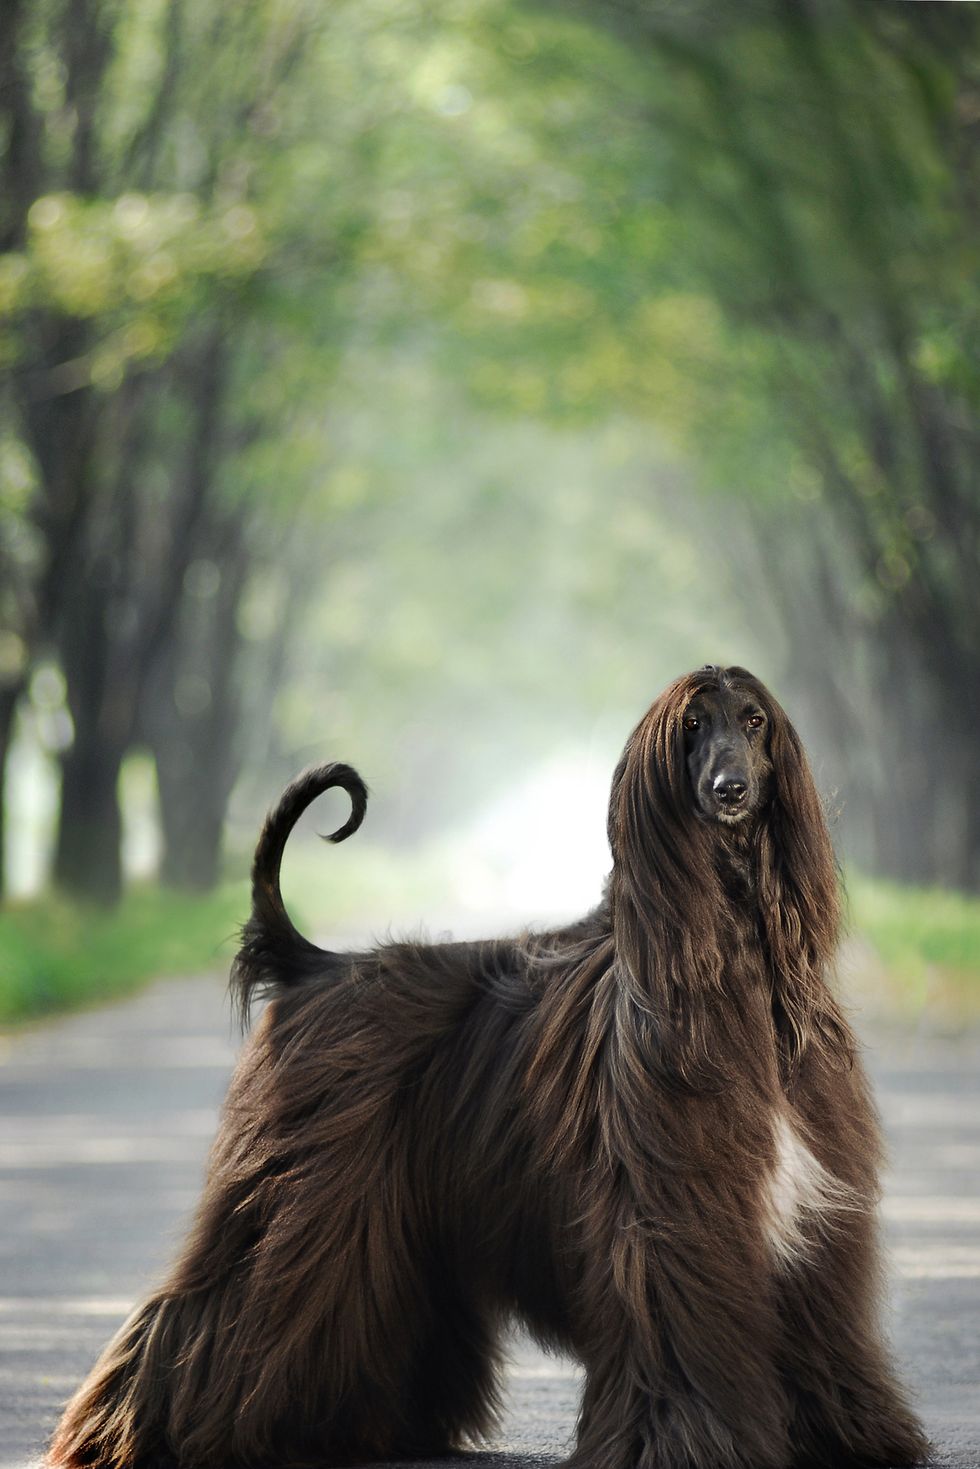 35 Large Dog Breeds That Make The Best Pets